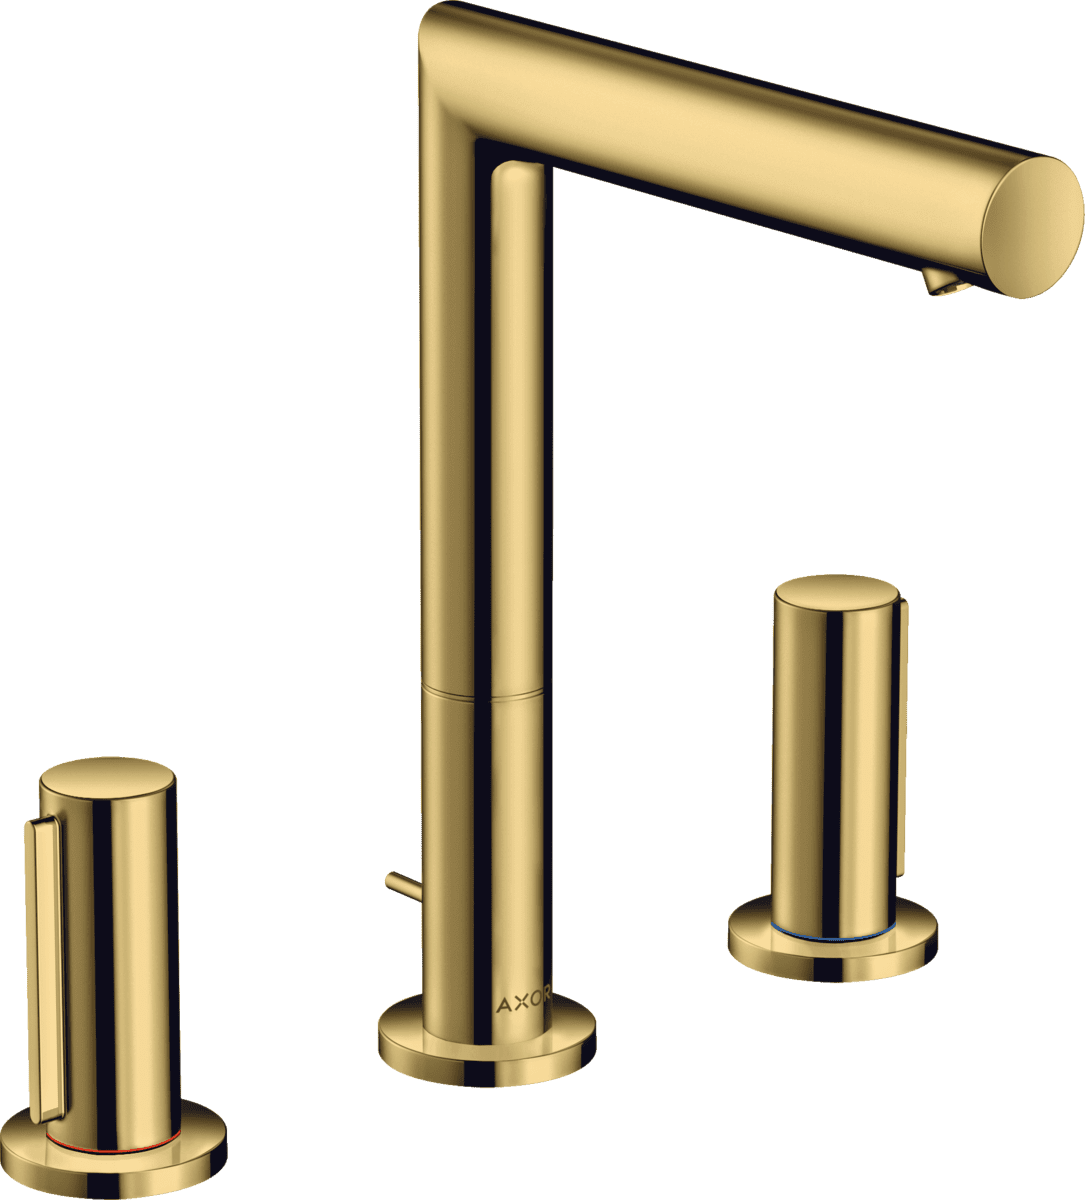 Picture of HANSGROHE AXOR Uno 3-hole basin mixer 200 with zero handles and pop-up waste set #45133990 - Polished Gold Optic